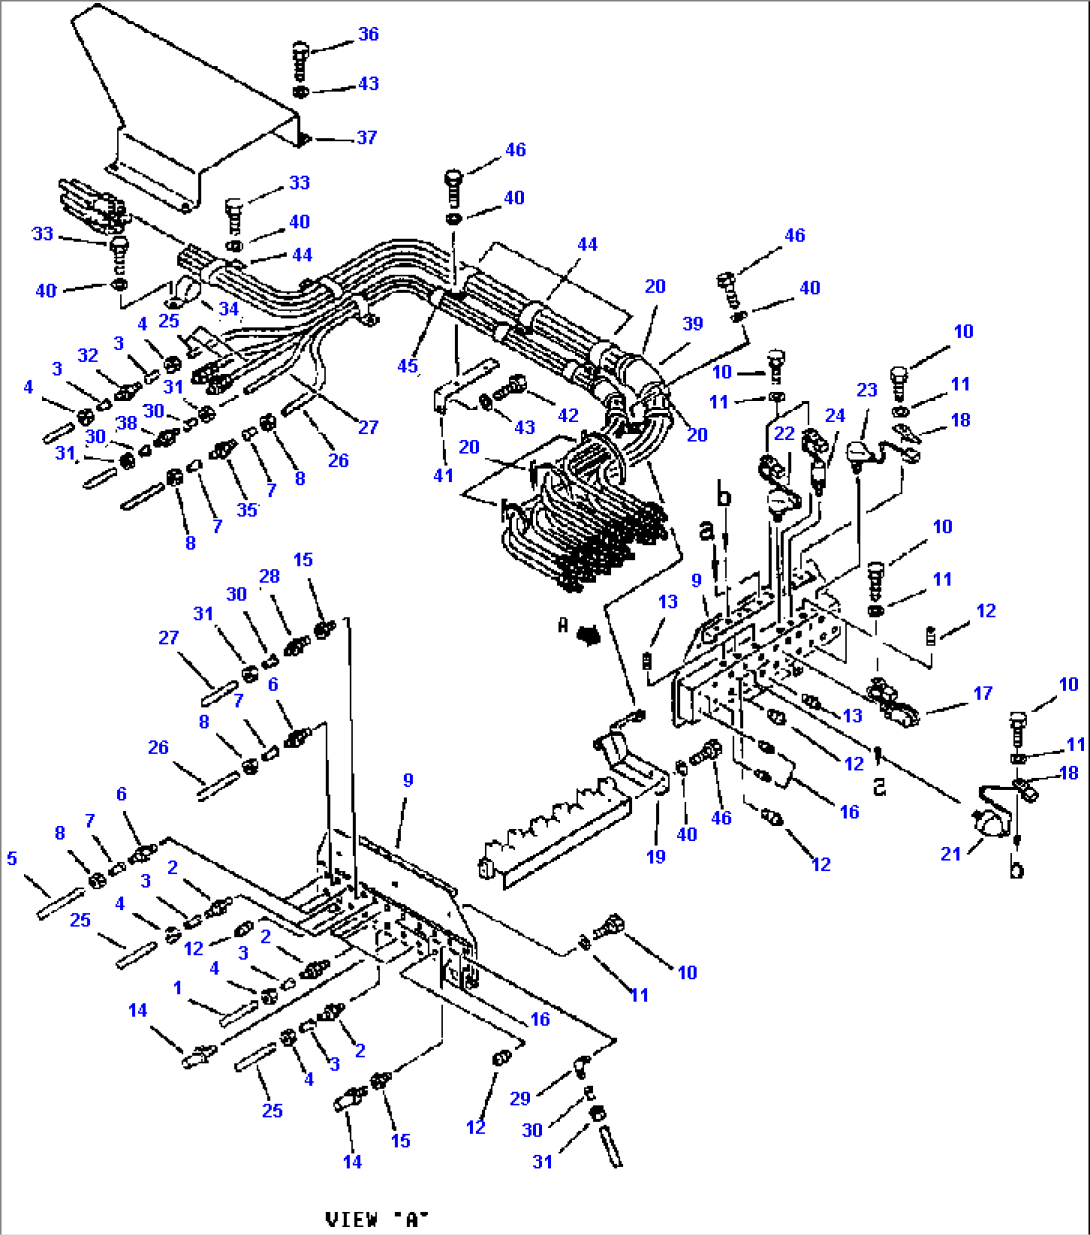 AIR PIPING - CAB JUNCTION - 7